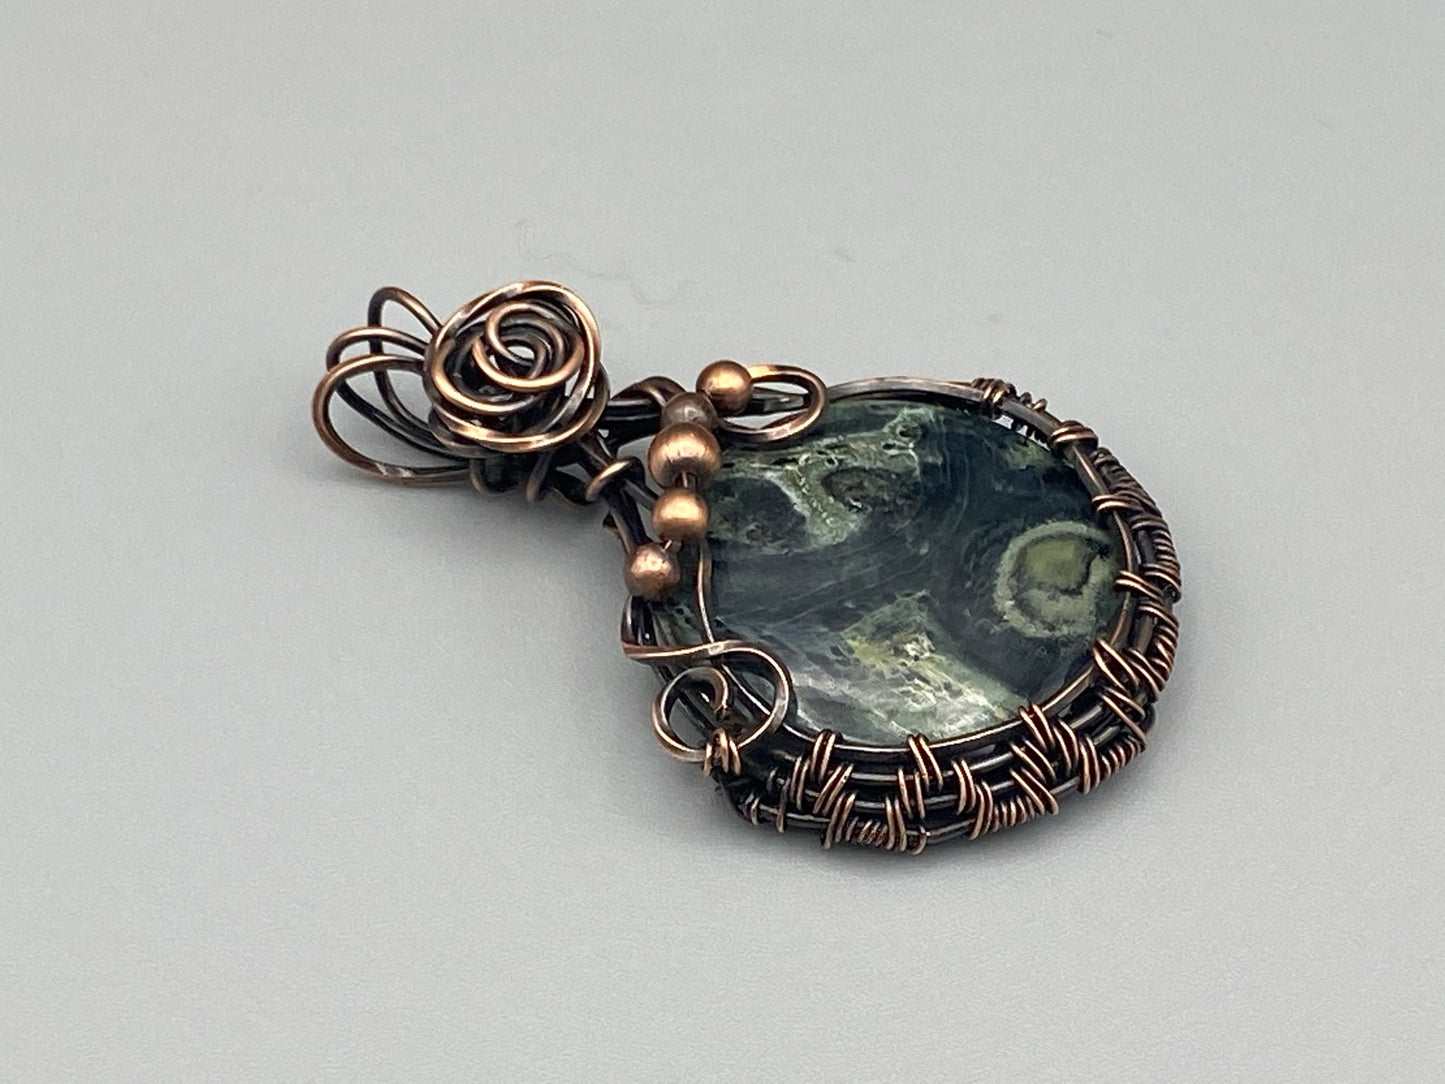 Natural Kambaba Jasper, Wire Wrapped and Woven Round Pendant